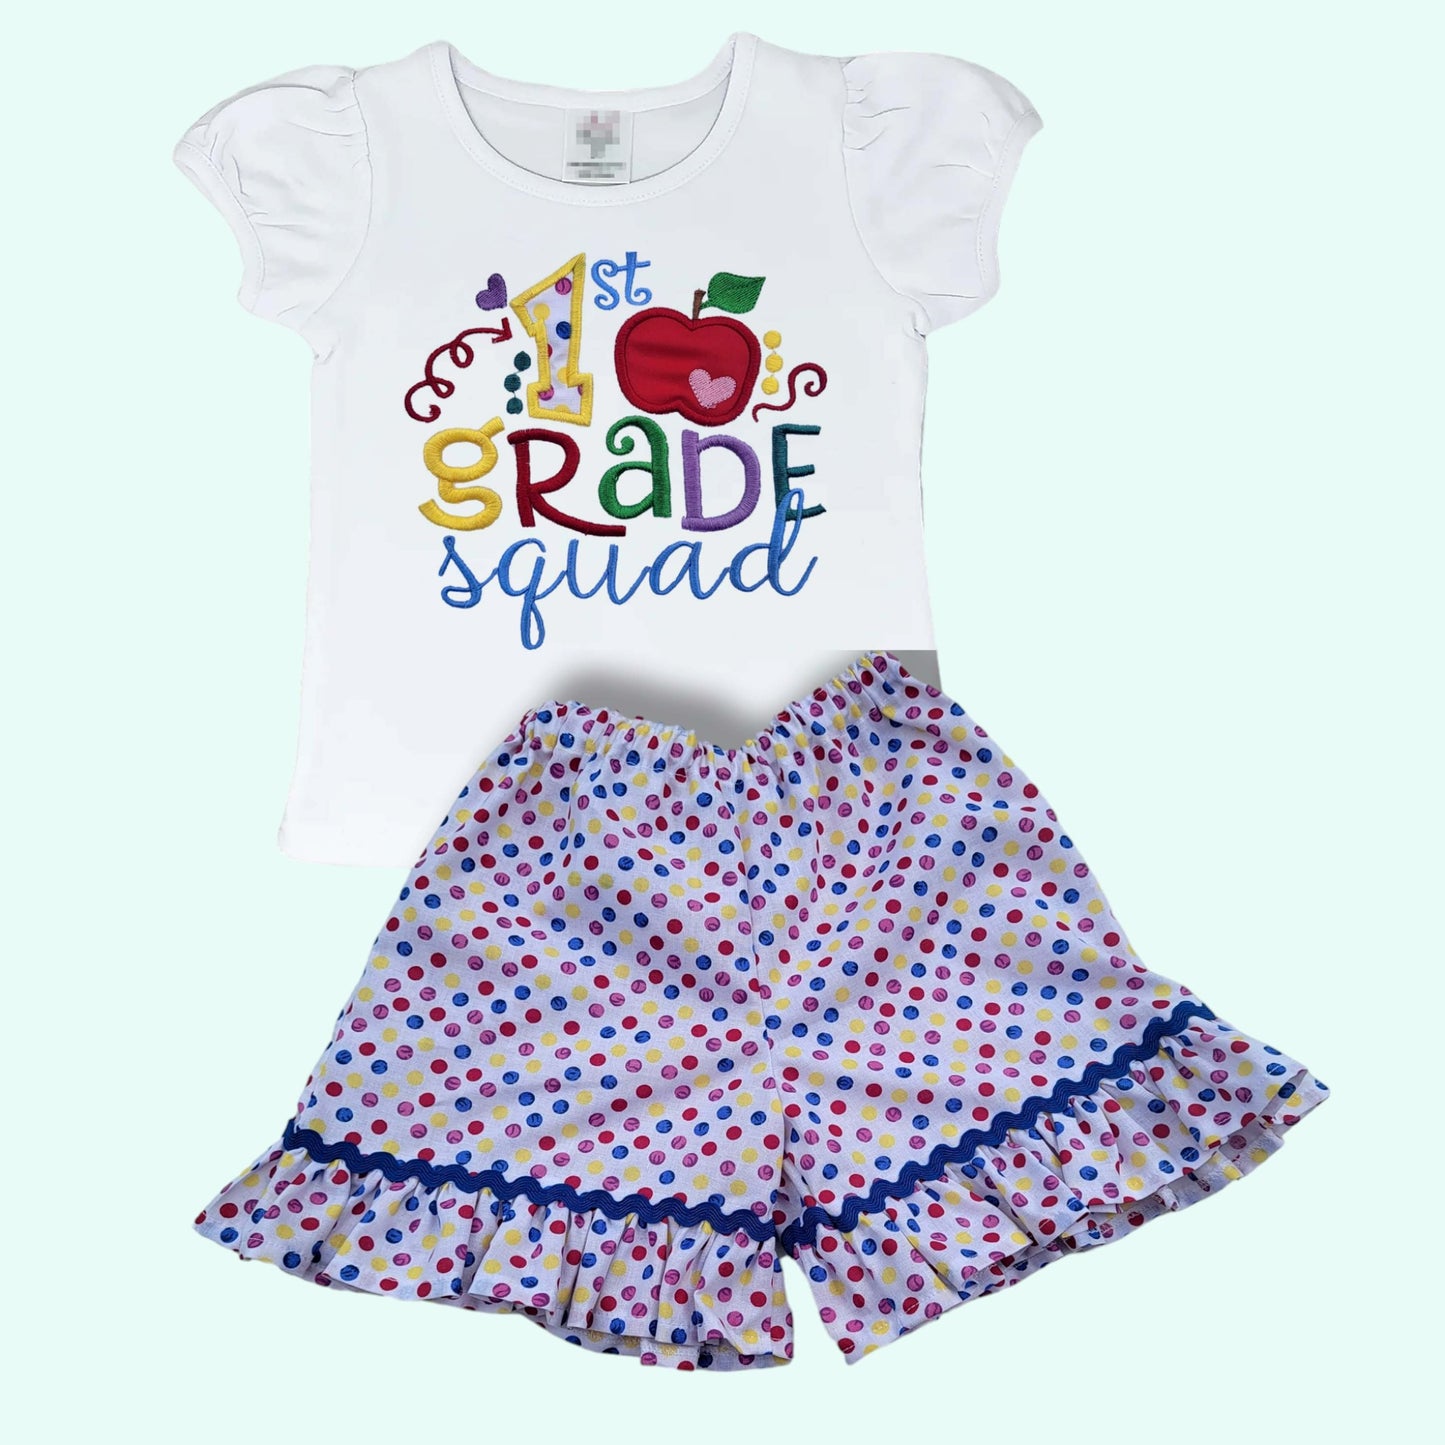 1st Grade Outfit